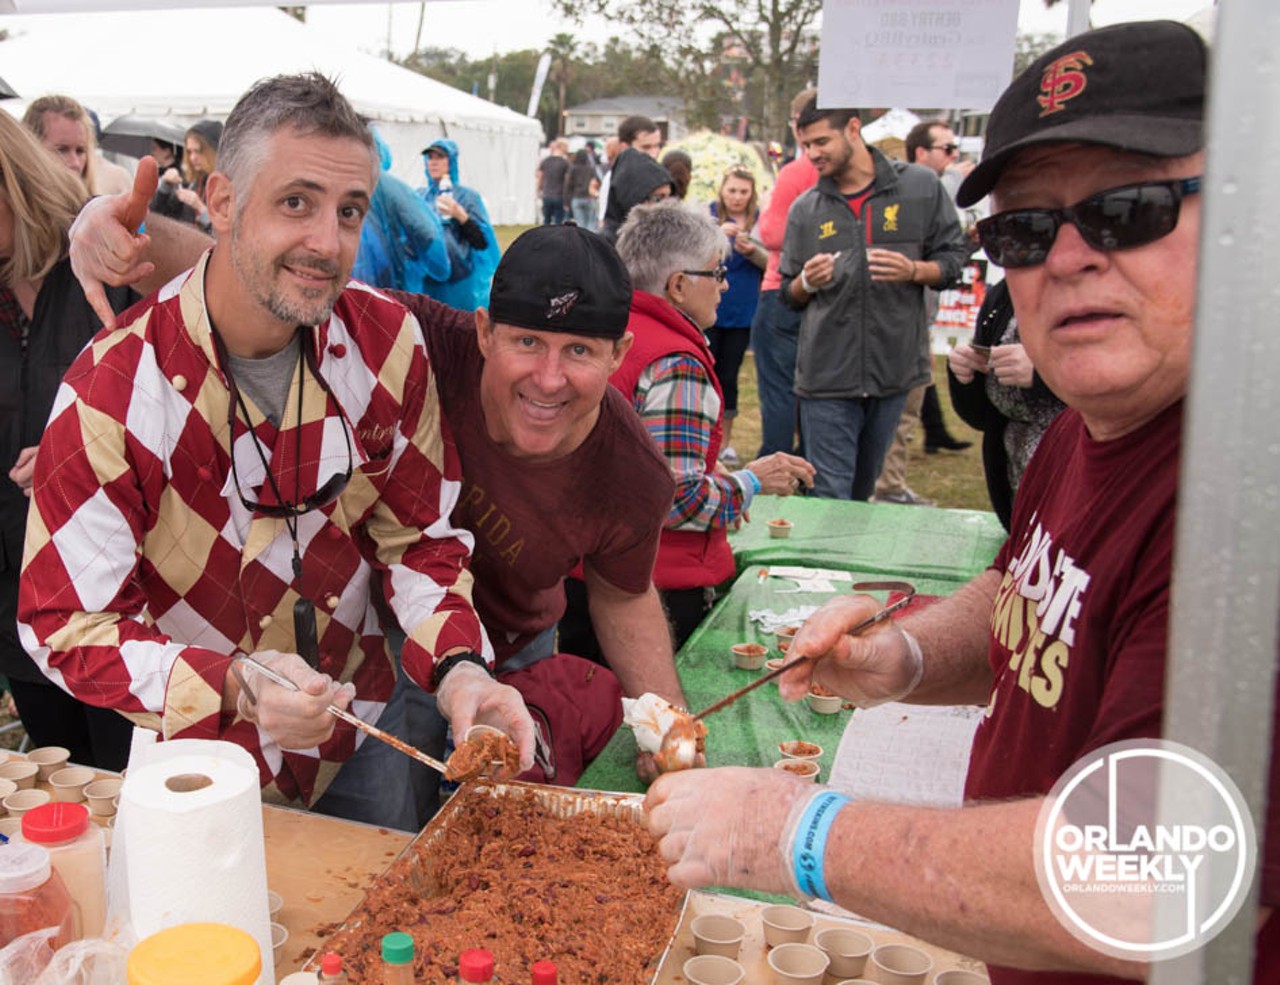 Photos of everyone who made the Northwestern Mutual Orlando Chili Cook-off a huge success